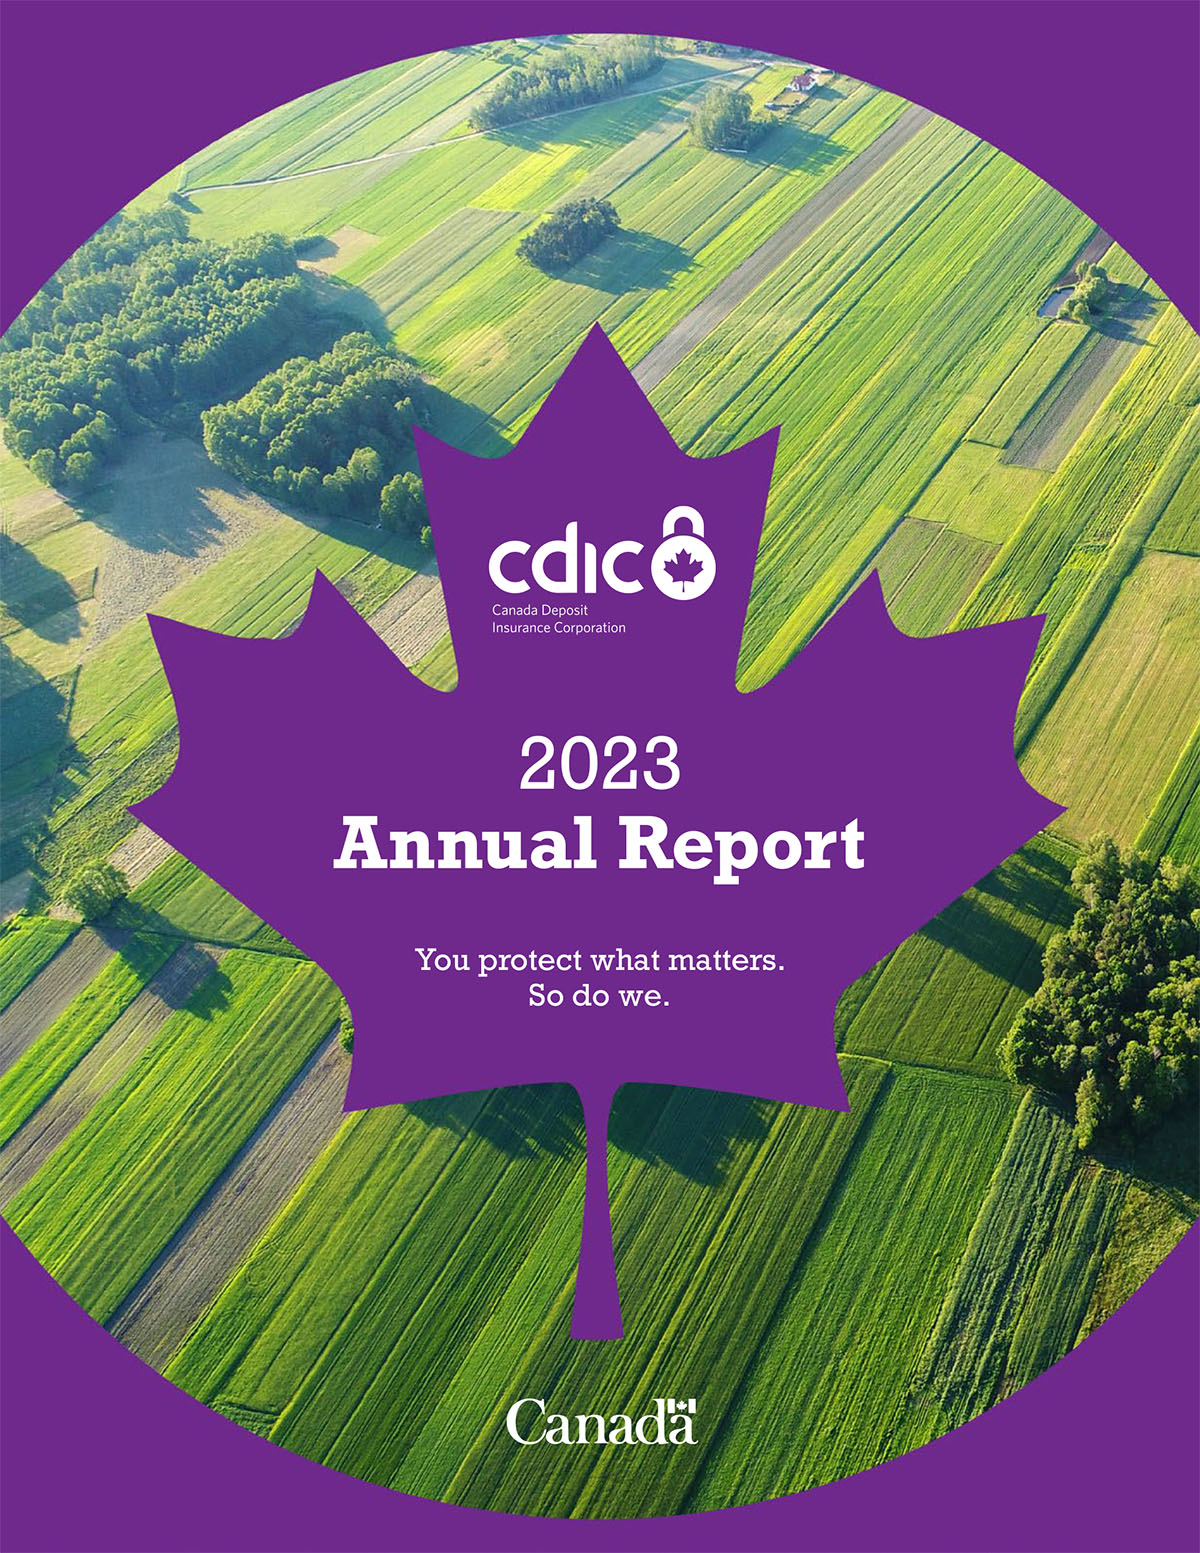 CDIC's 2023 Annual Report (Cover) - You protect what matters. So do we.